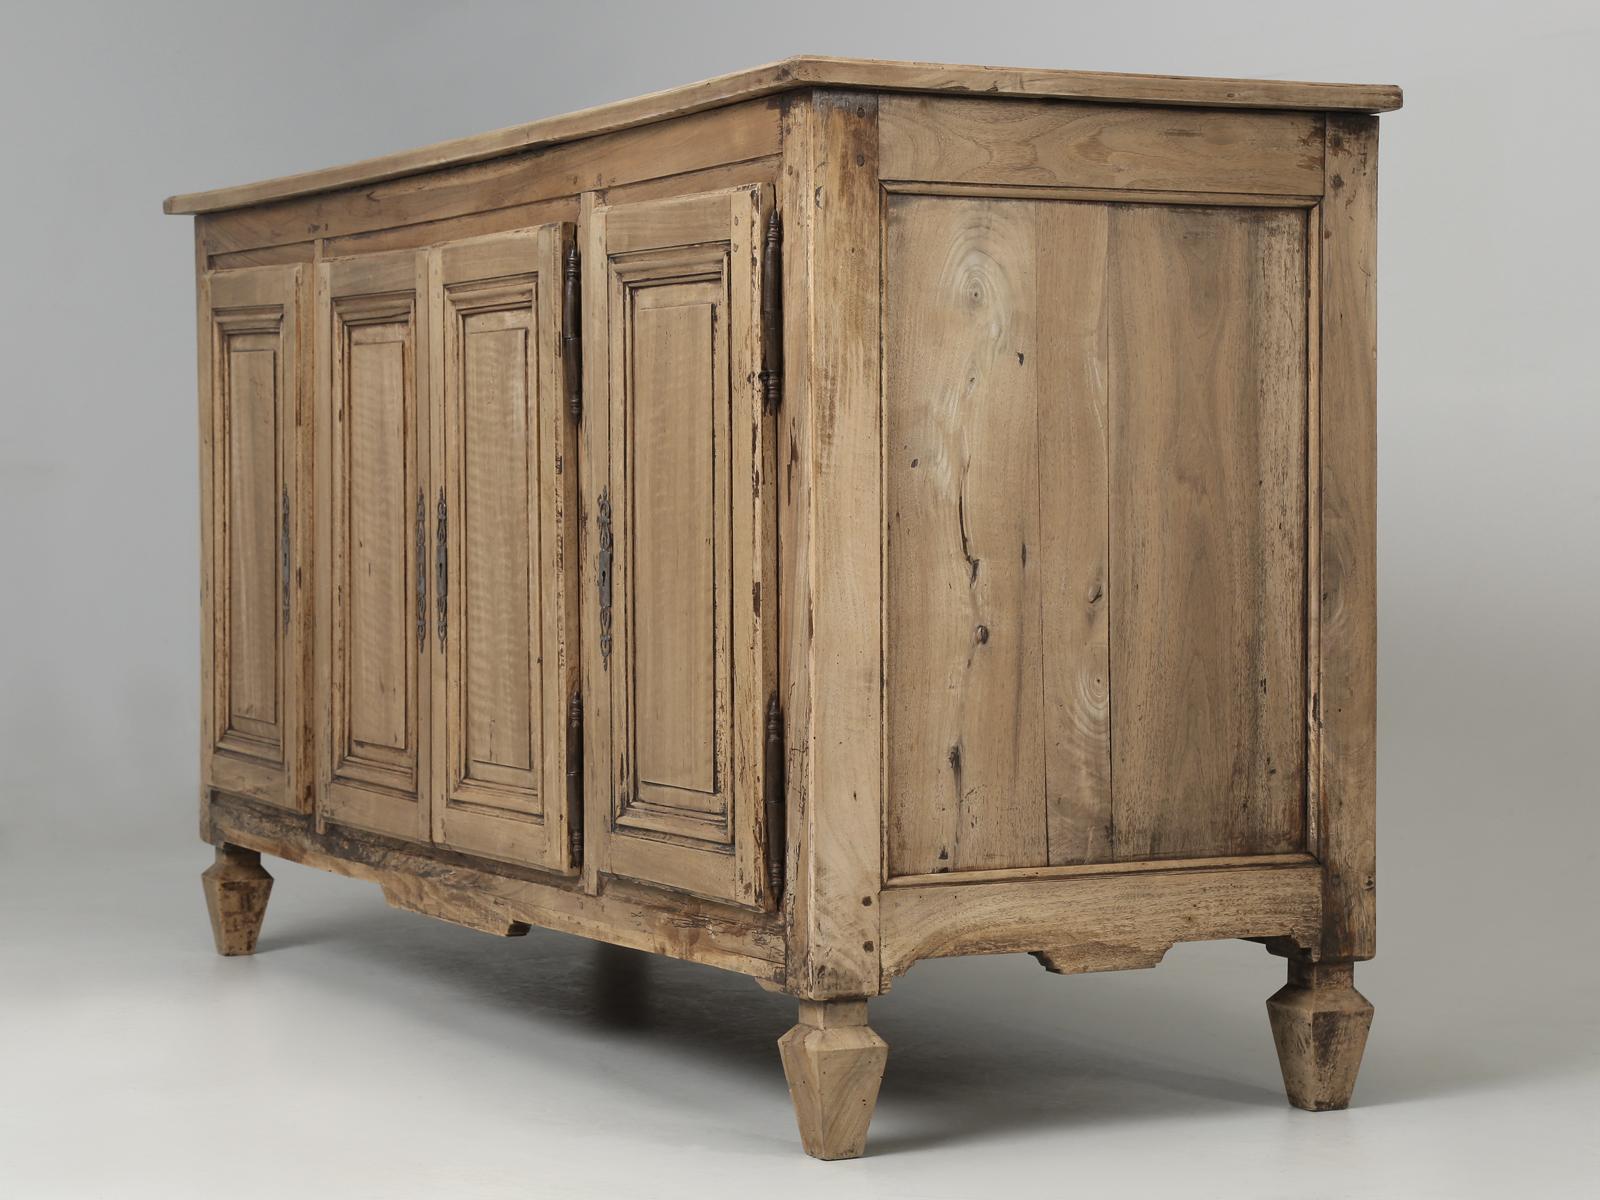 Antique French Country Style walnut buffet, that has successfully managed to escape the ravage hands of amateur restorers for more than 200-years. Other than several very old repairs at the base, which are quite typical for genuine antique French